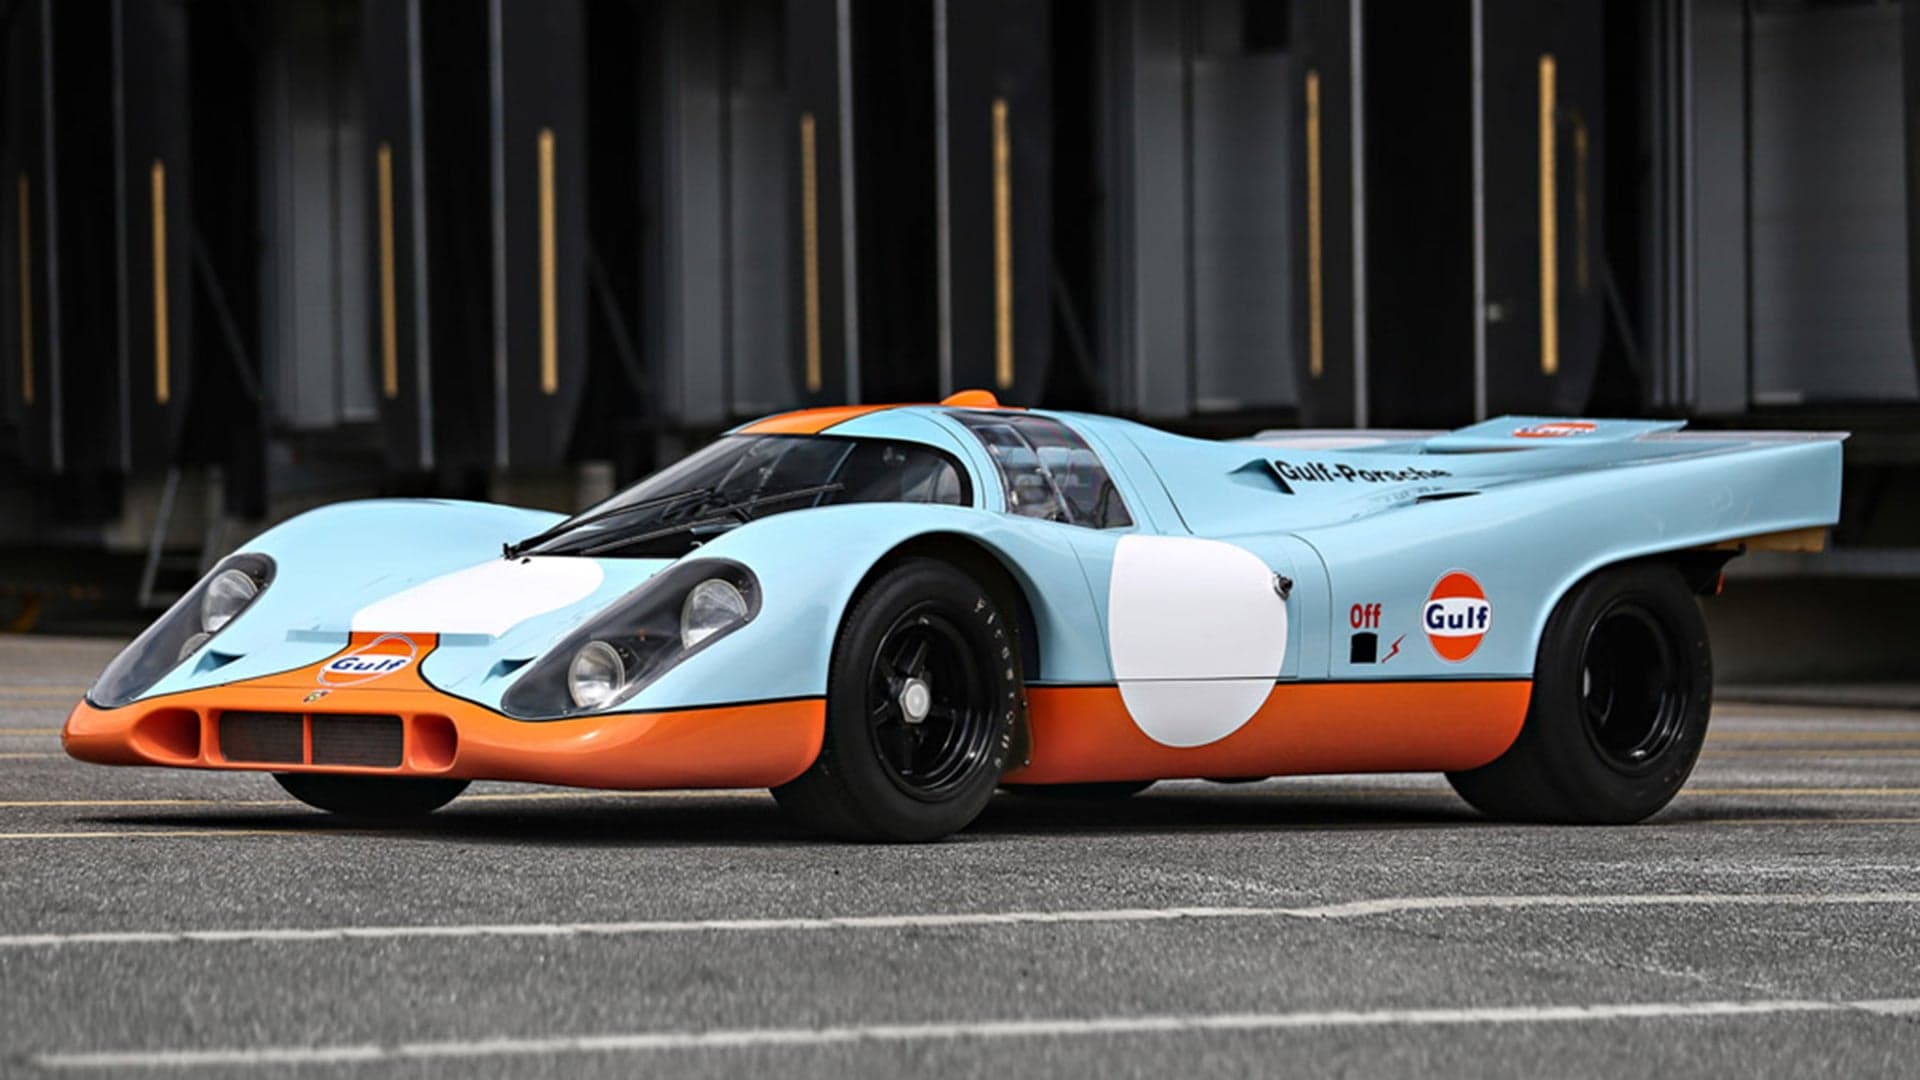 These Are the Stories Behind the Porsche 917’s Five Most Iconic Liveries